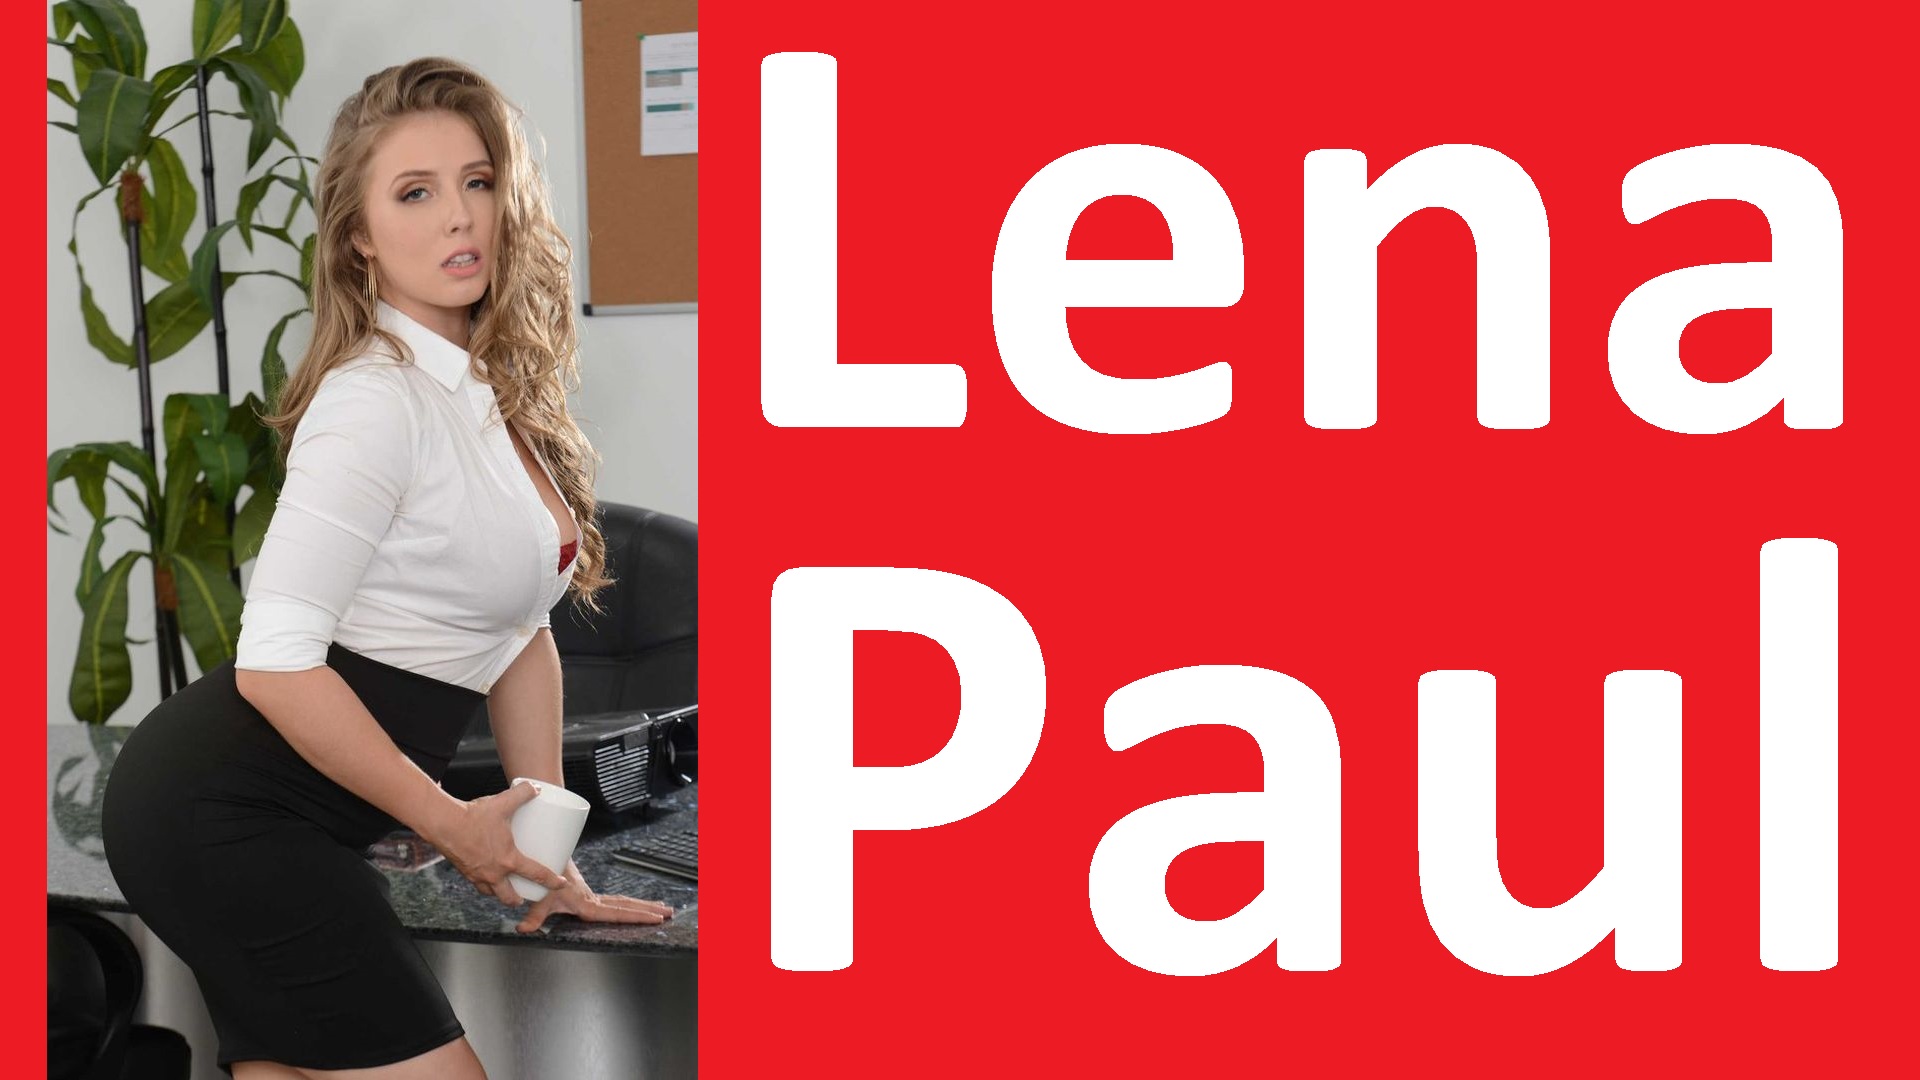 Lena paul shows her nice images